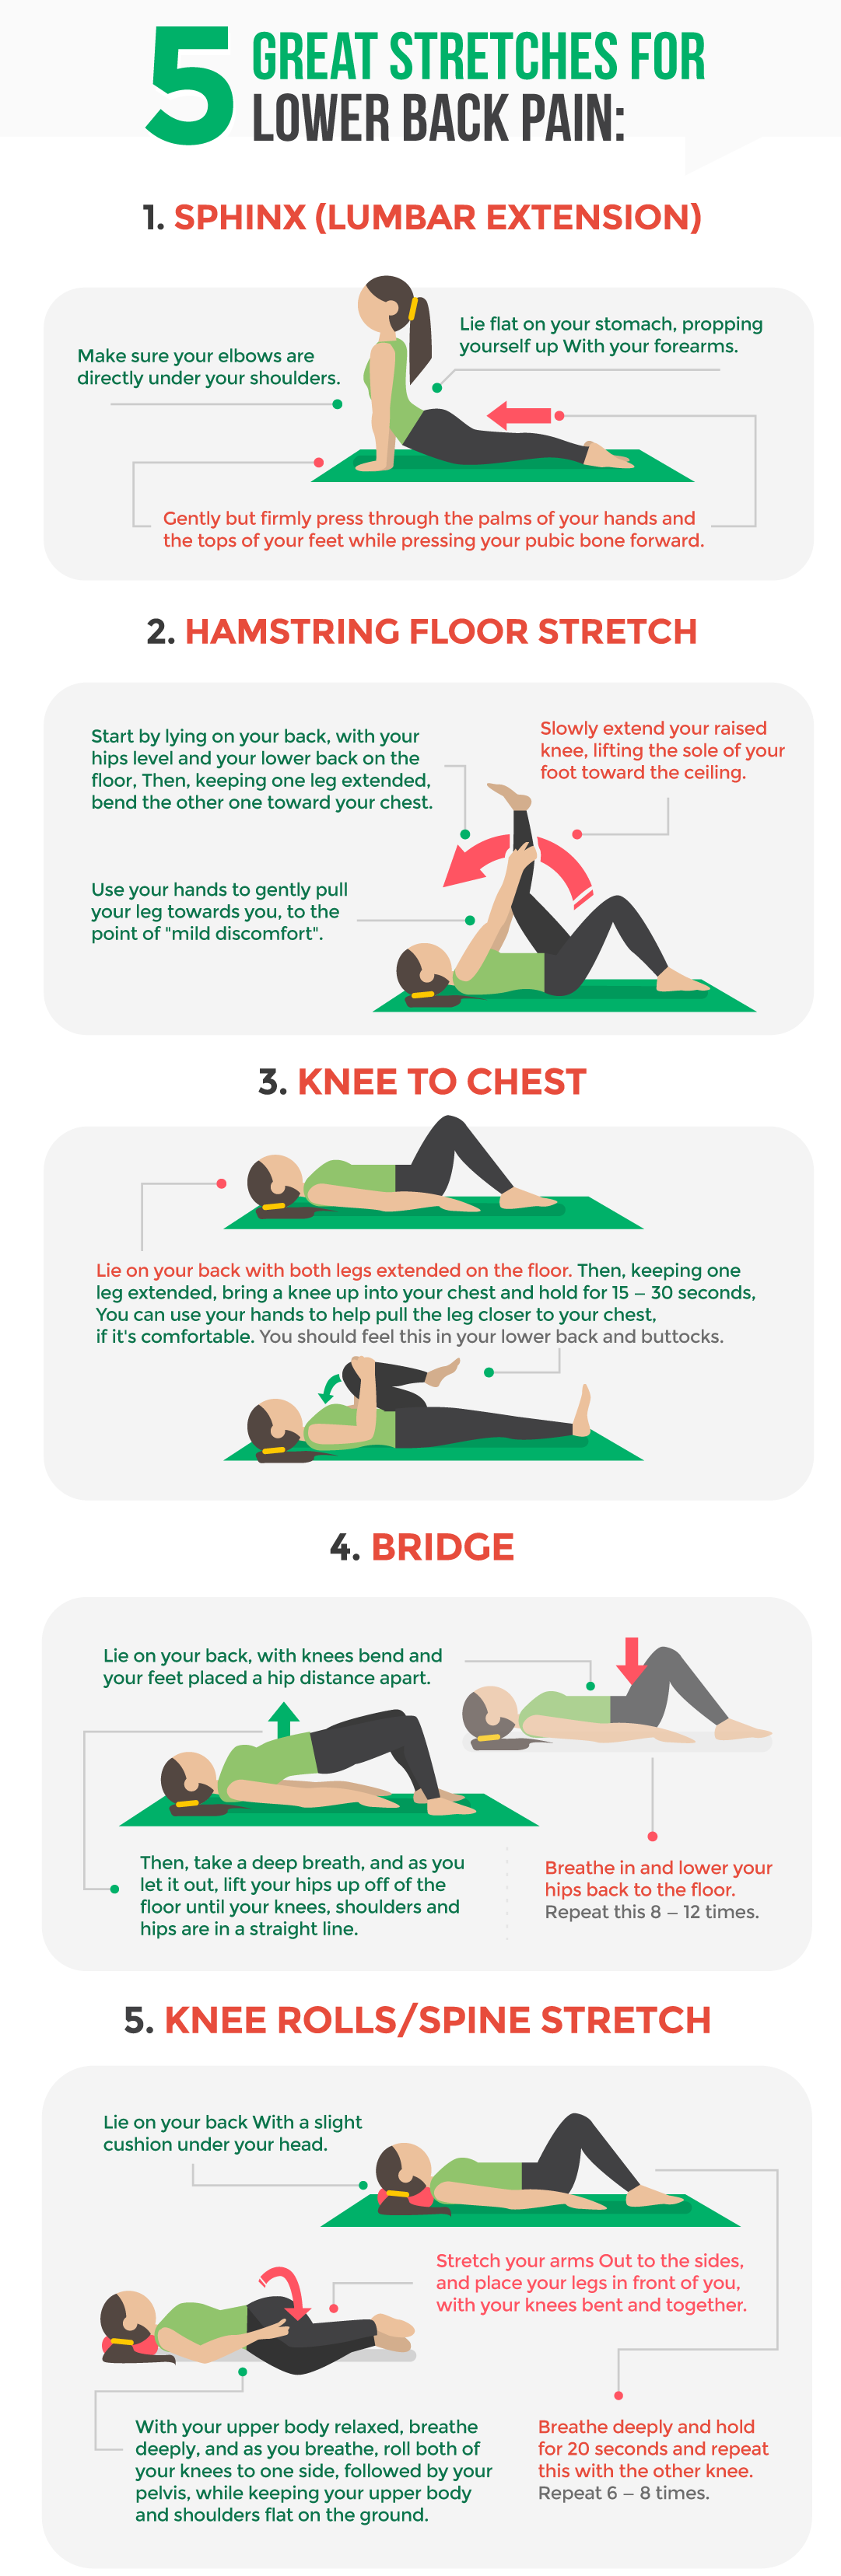 https://bodybalancephysicaltherapy.com/wp-content/uploads/2017/09/back-pain-exercises-x5-stretches.png